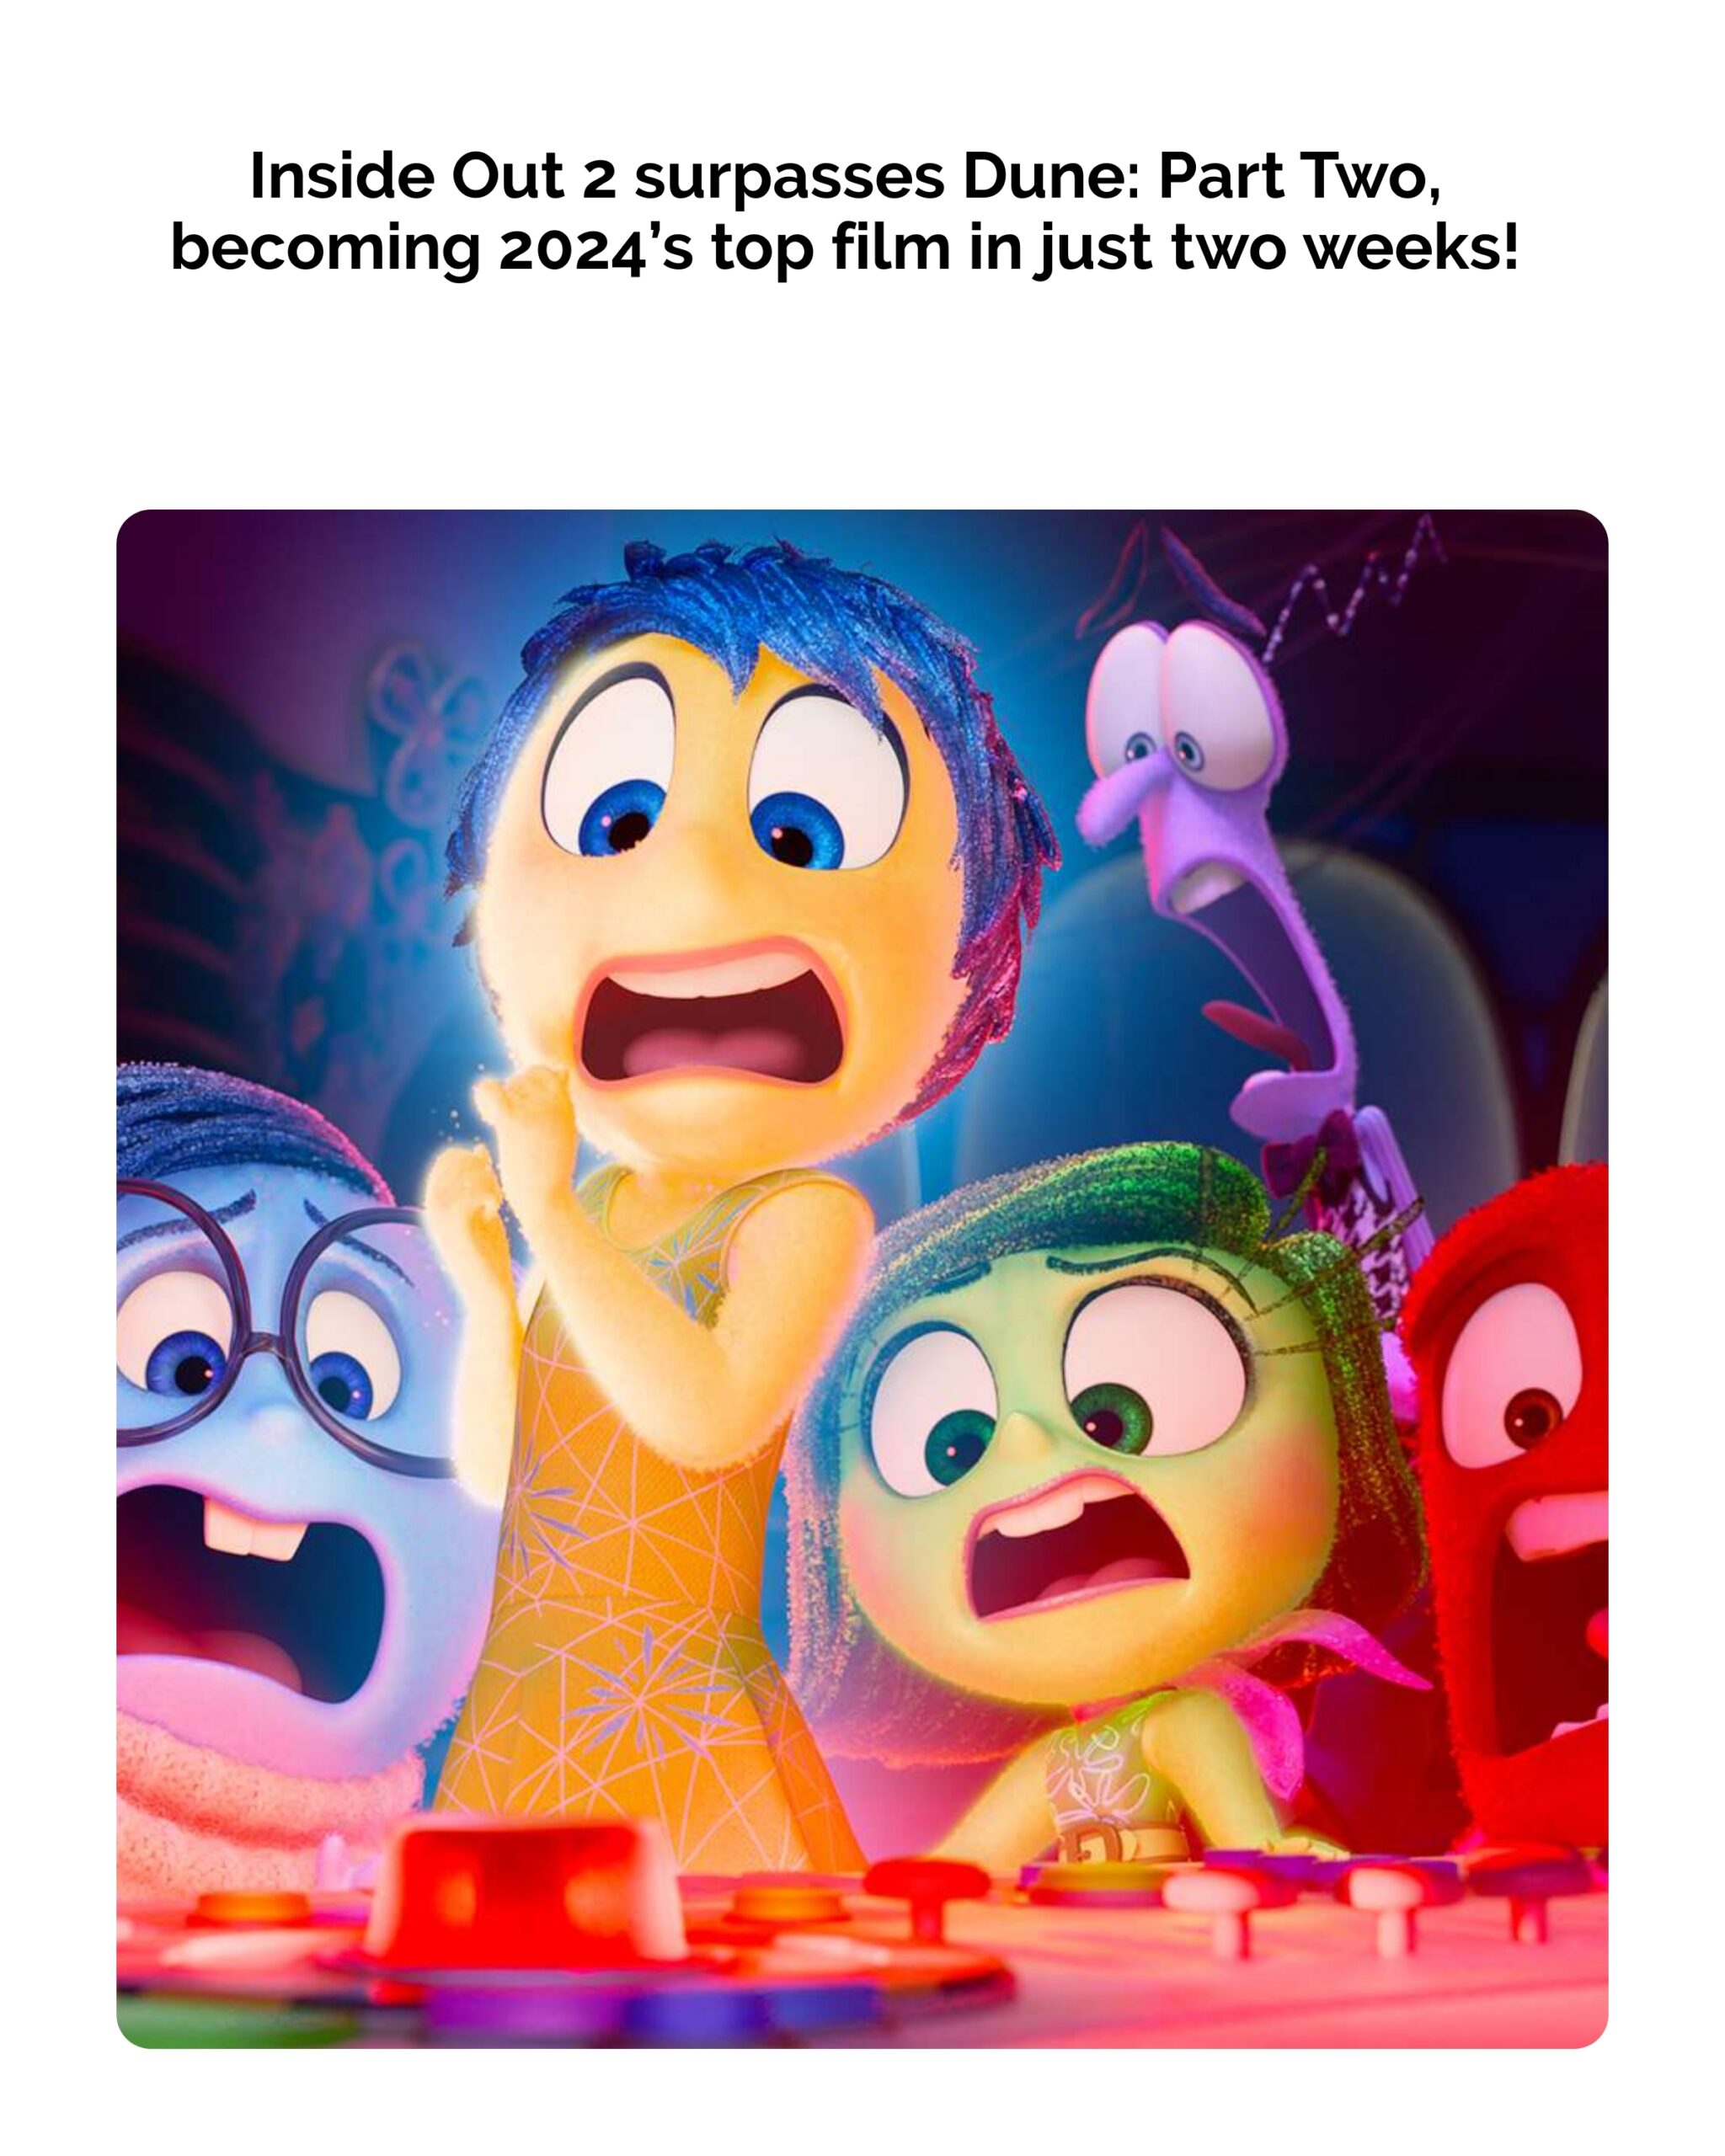 Inside Out 2 Dethrones Dune: Part Two to Become Top Film of 2024 in Just 2 Weeks